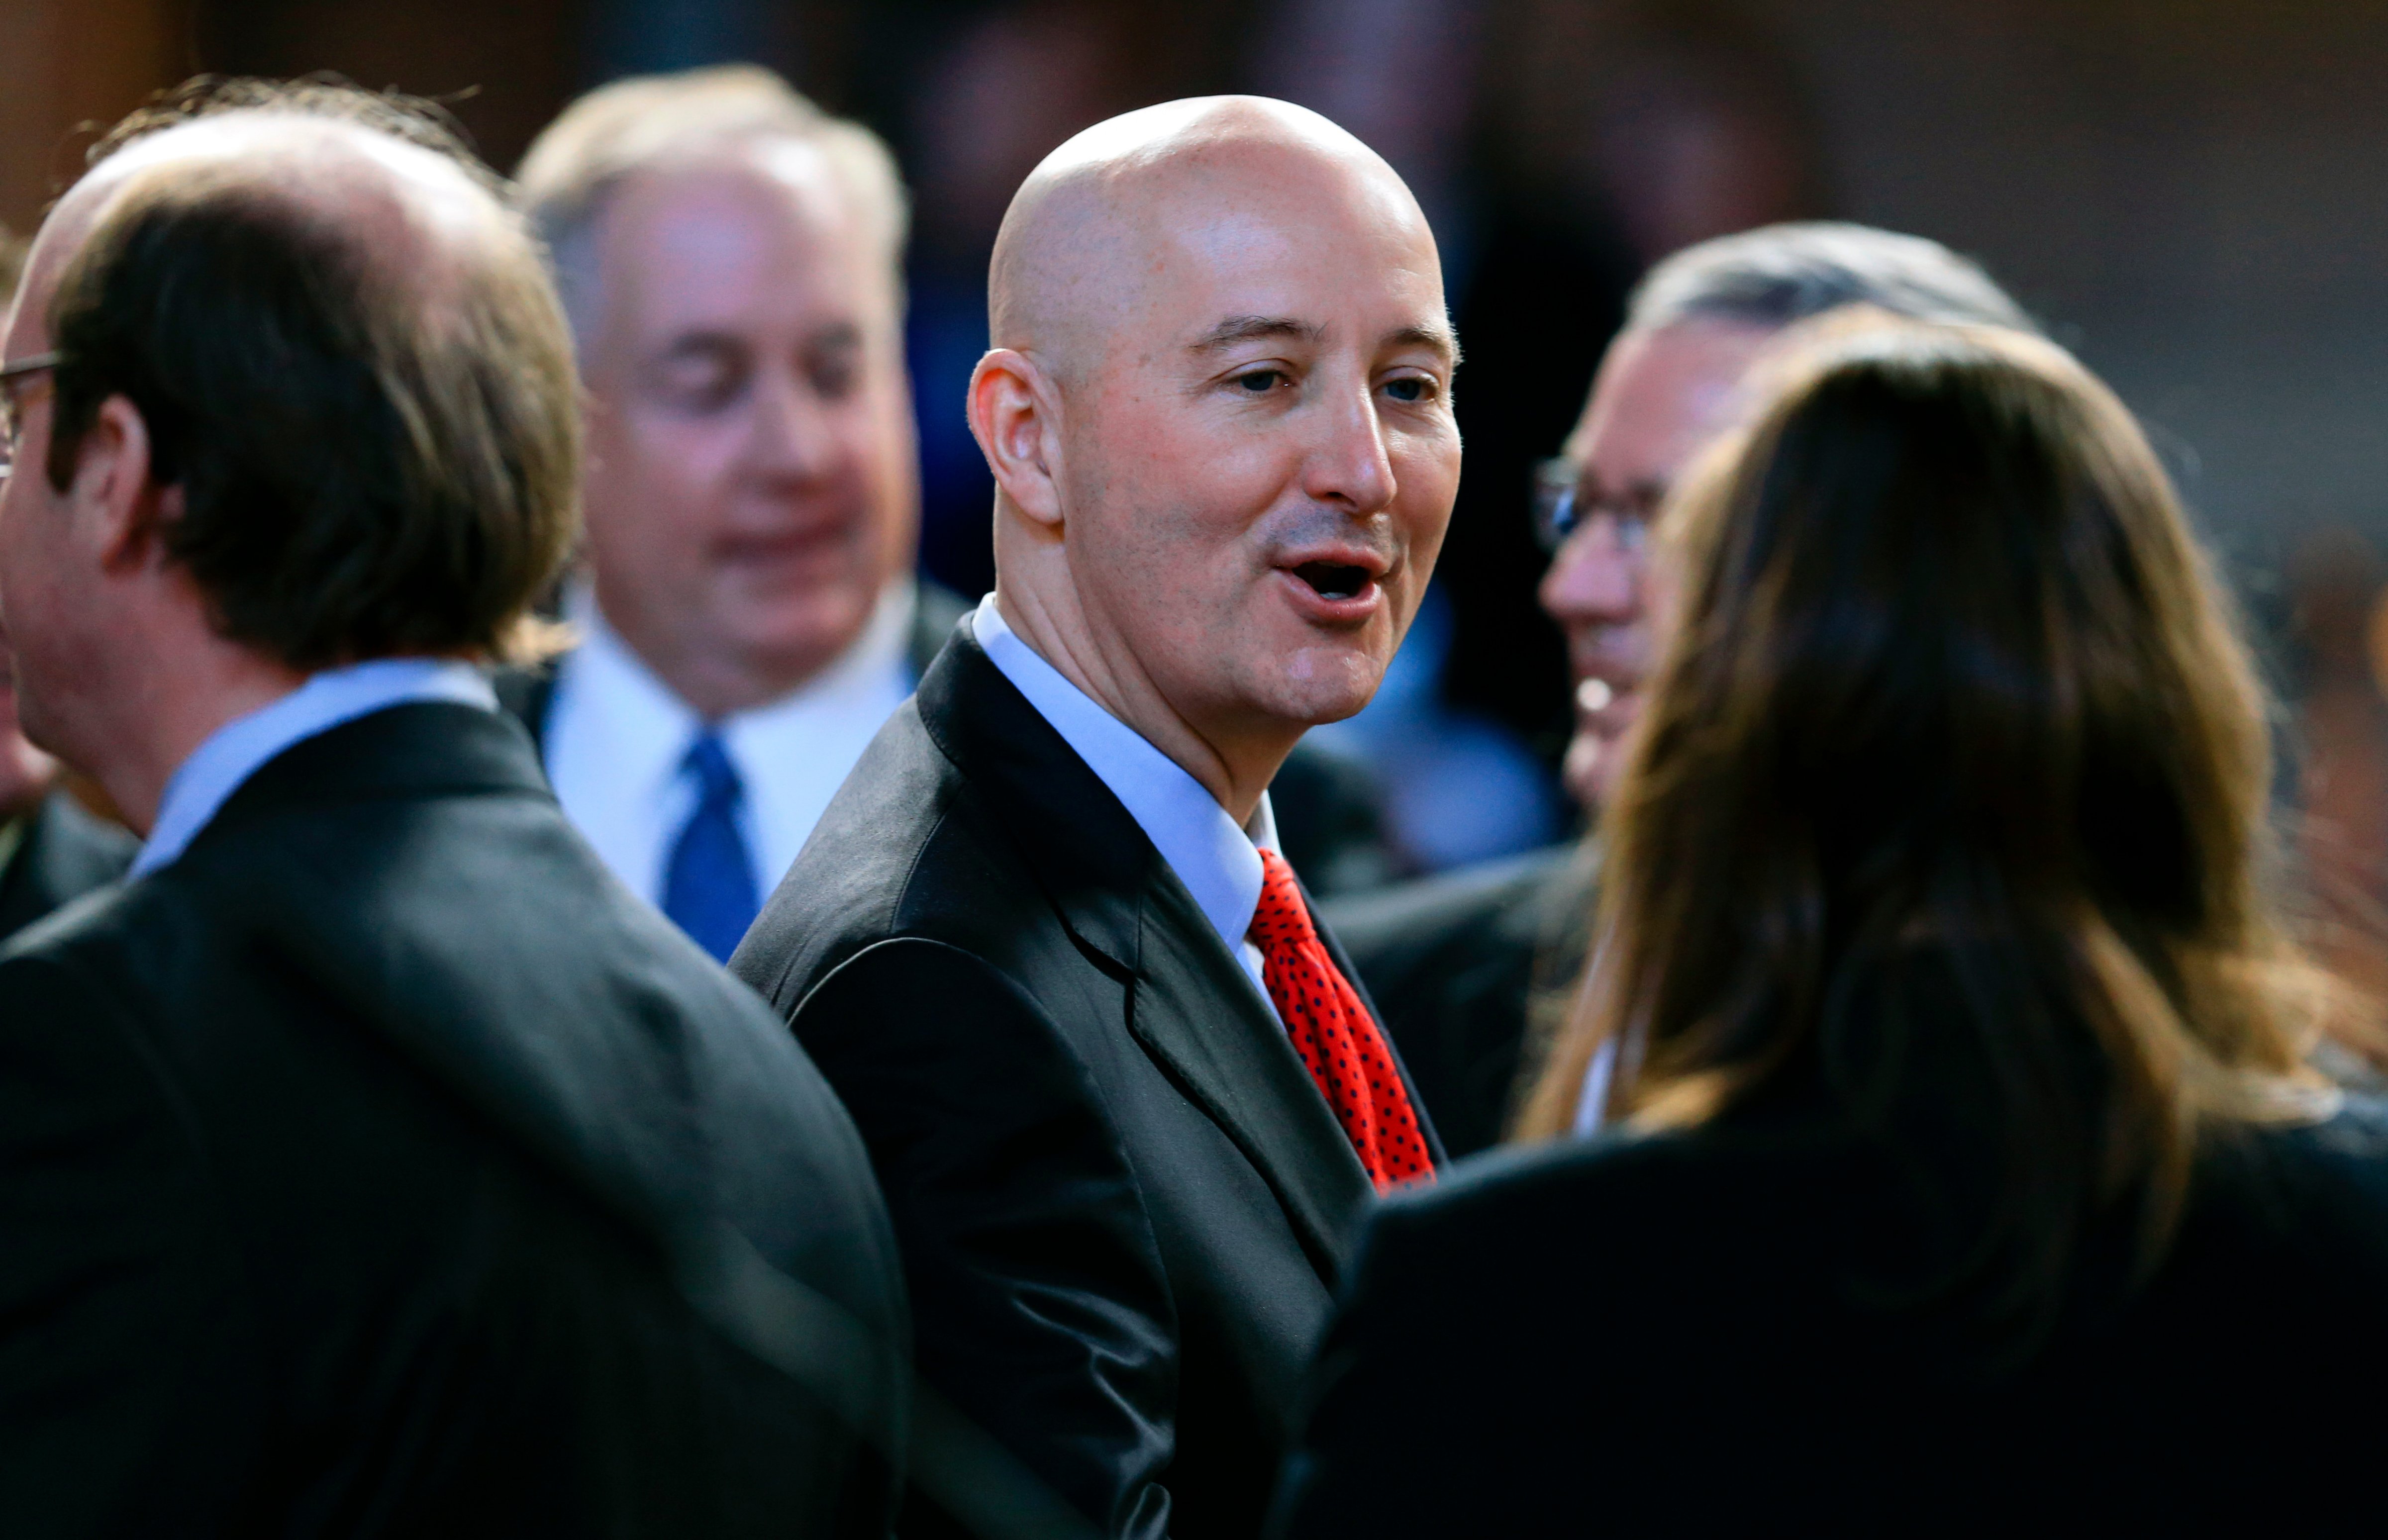 Nebraska Gov. Pete Ricketts greets state senators as he arrives at the Legislative Chamber to deliver the annual State of the State address, in Lincoln, Neb. Jan. 14, 2016. Ricketts led an effort to restore the state's death penalty after lawmakers eliminated it. (Nati Harnik—AP)